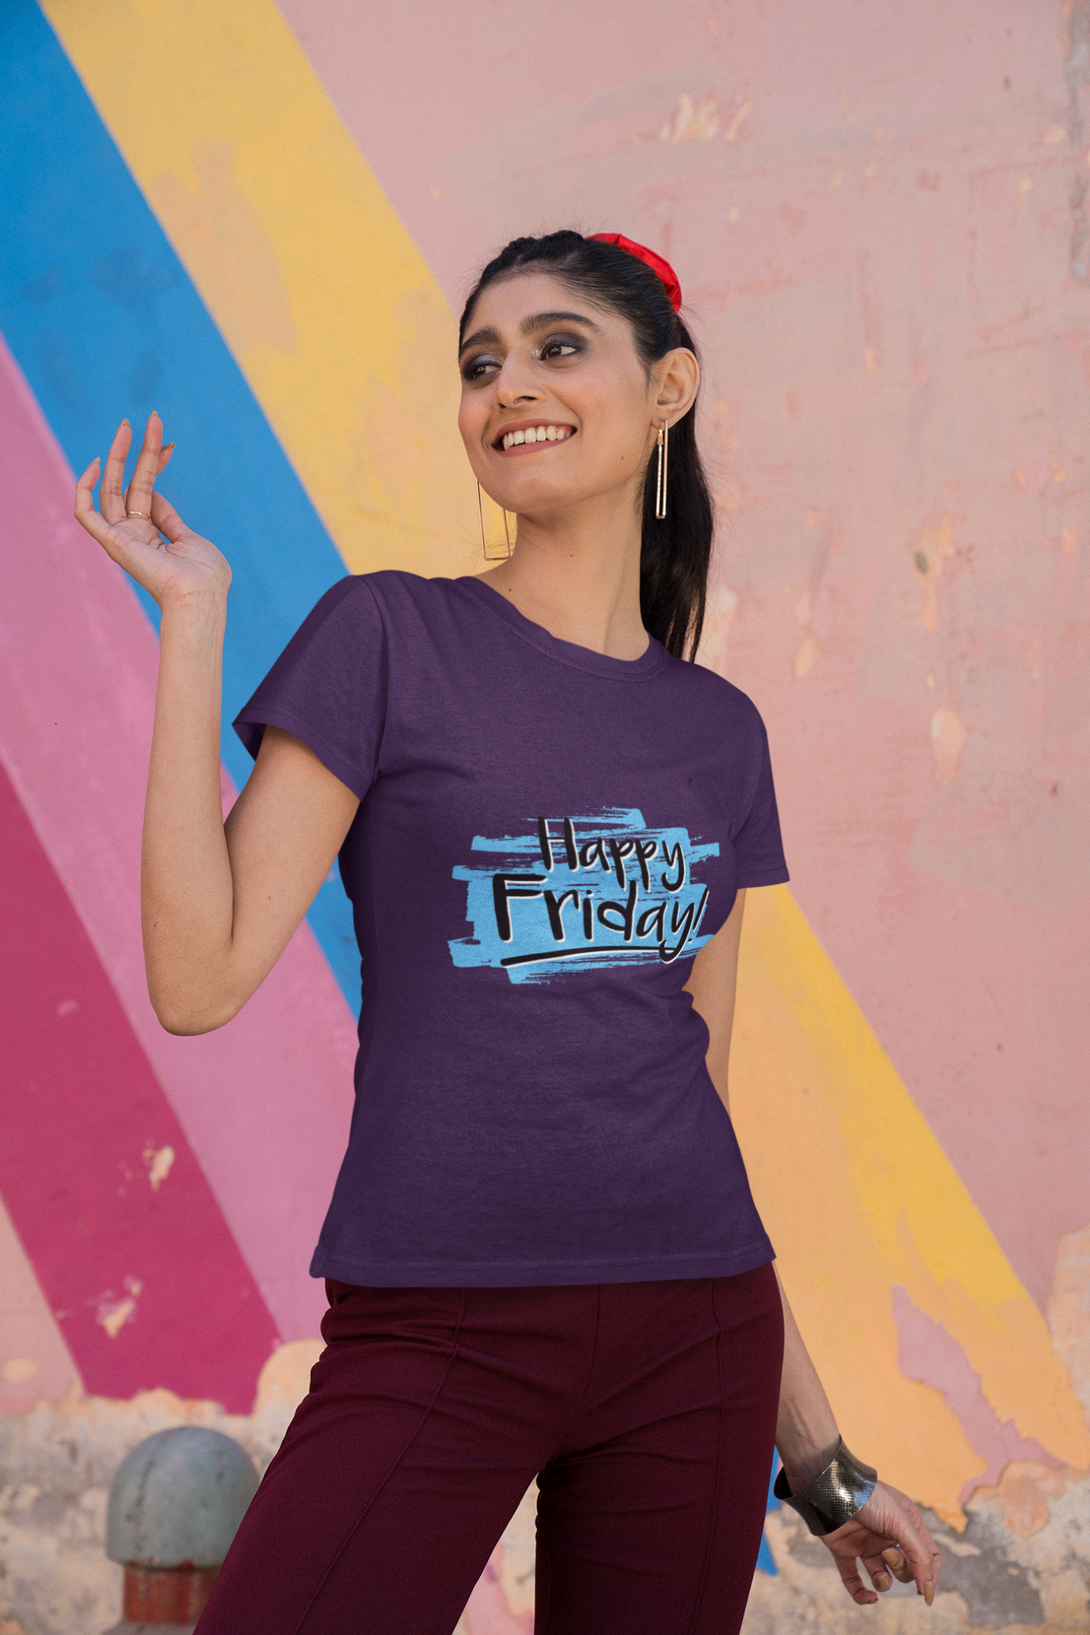 Happy Friday Printed T-Shirt For Women - WowWaves - 4